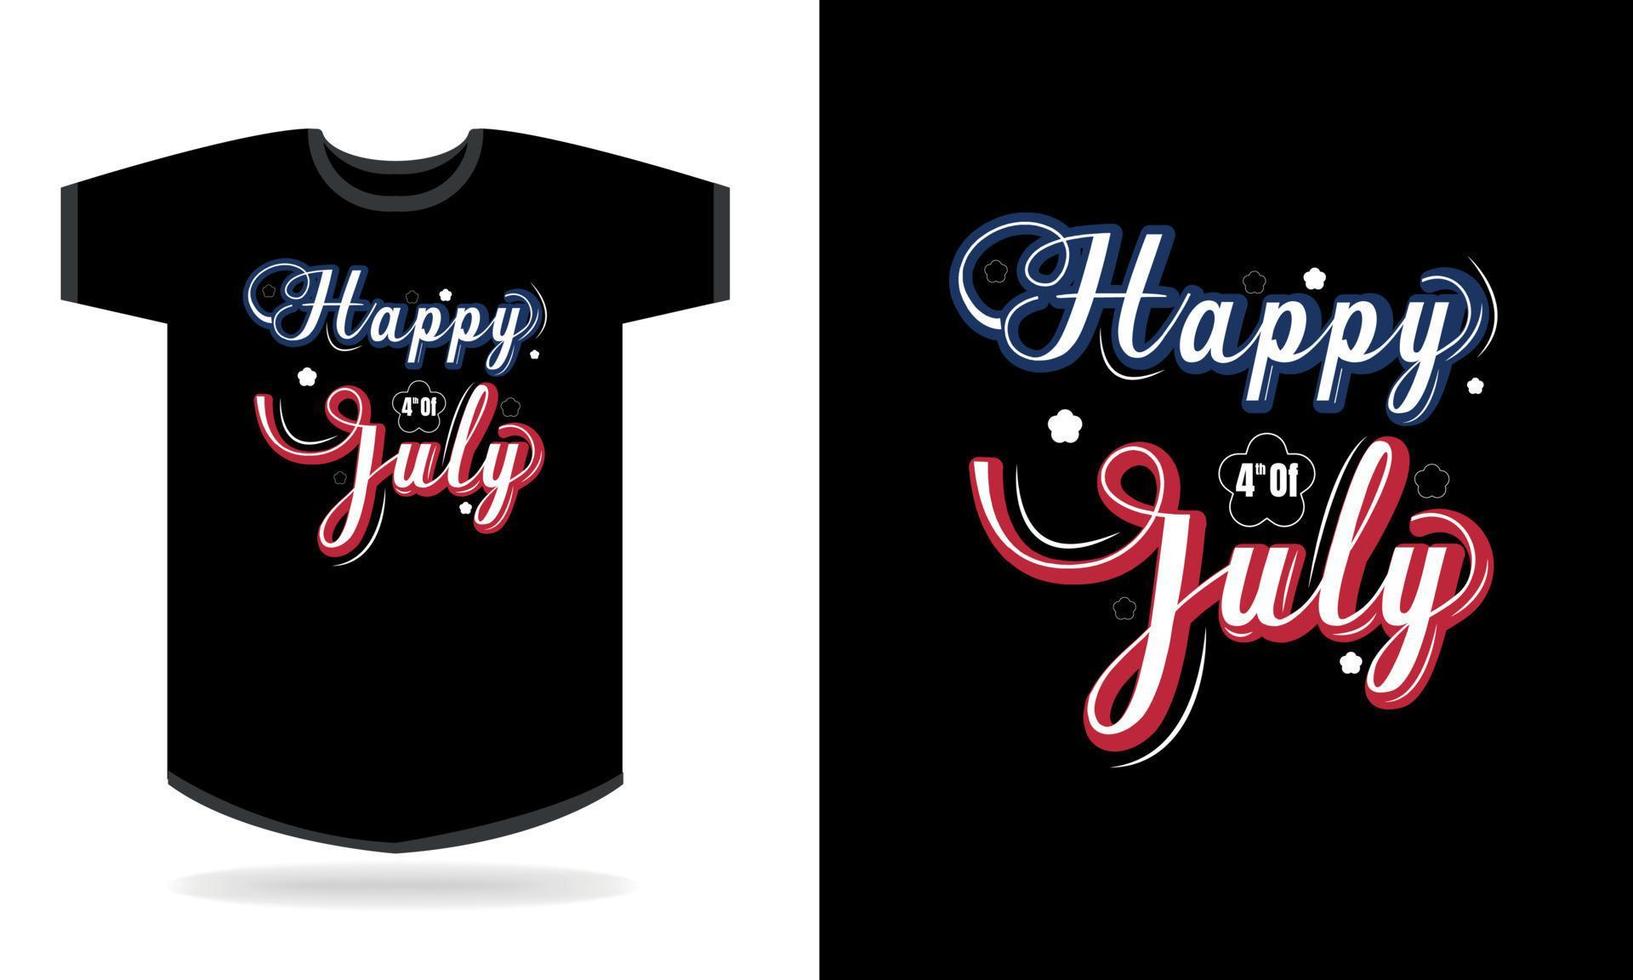 Happy 4th of July t-shirt design vector